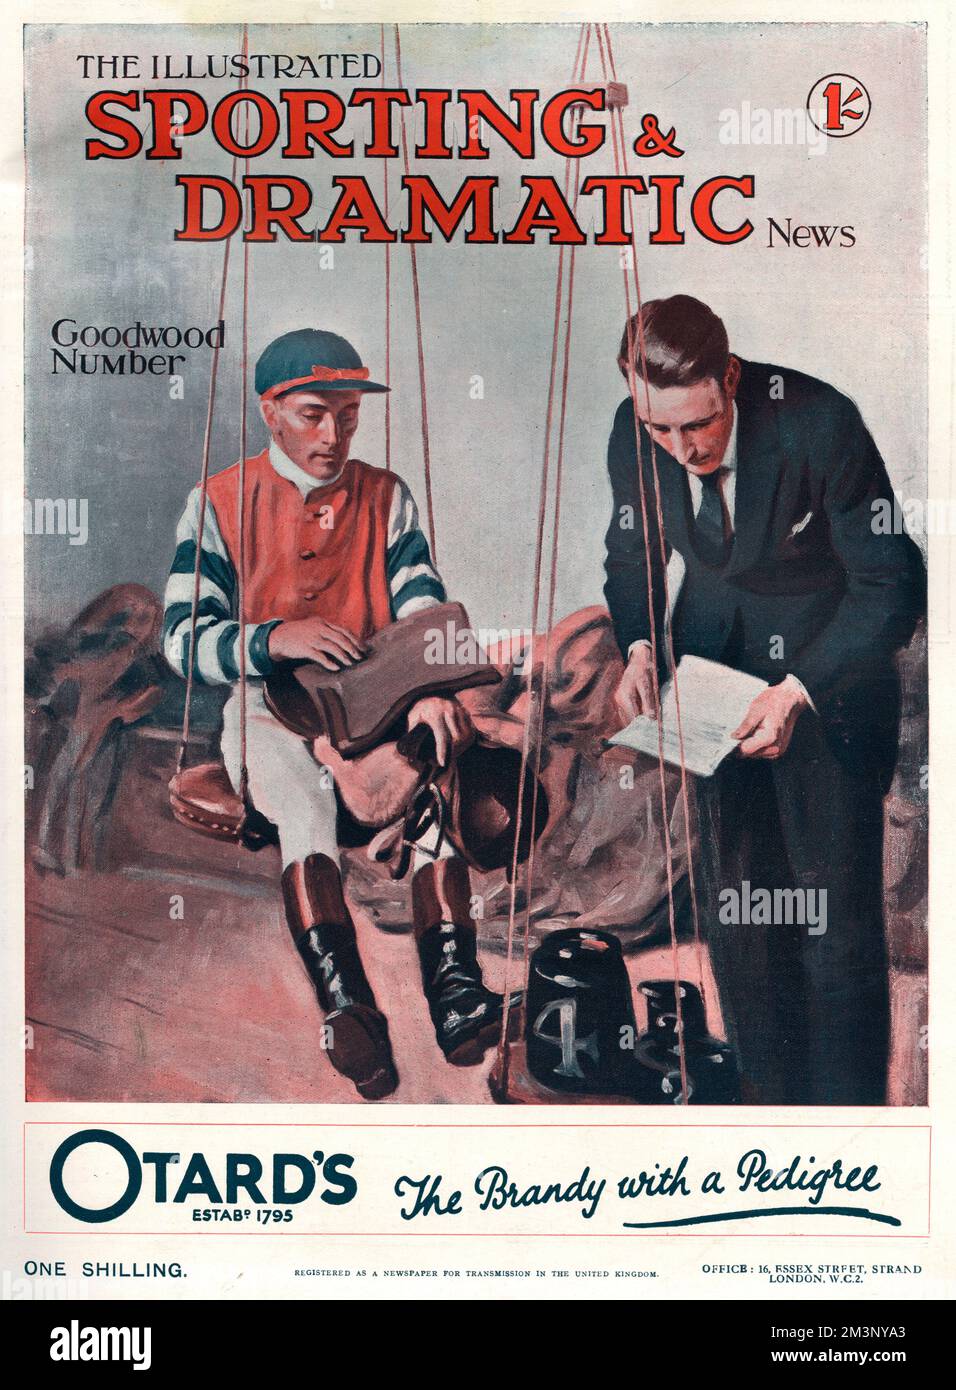 Front cover of the Goodwood Number of the Illustrated Sporting and Dramatic News featuring a jockey in the weighing room prior to a race.     Date: 1928 Stock Photo